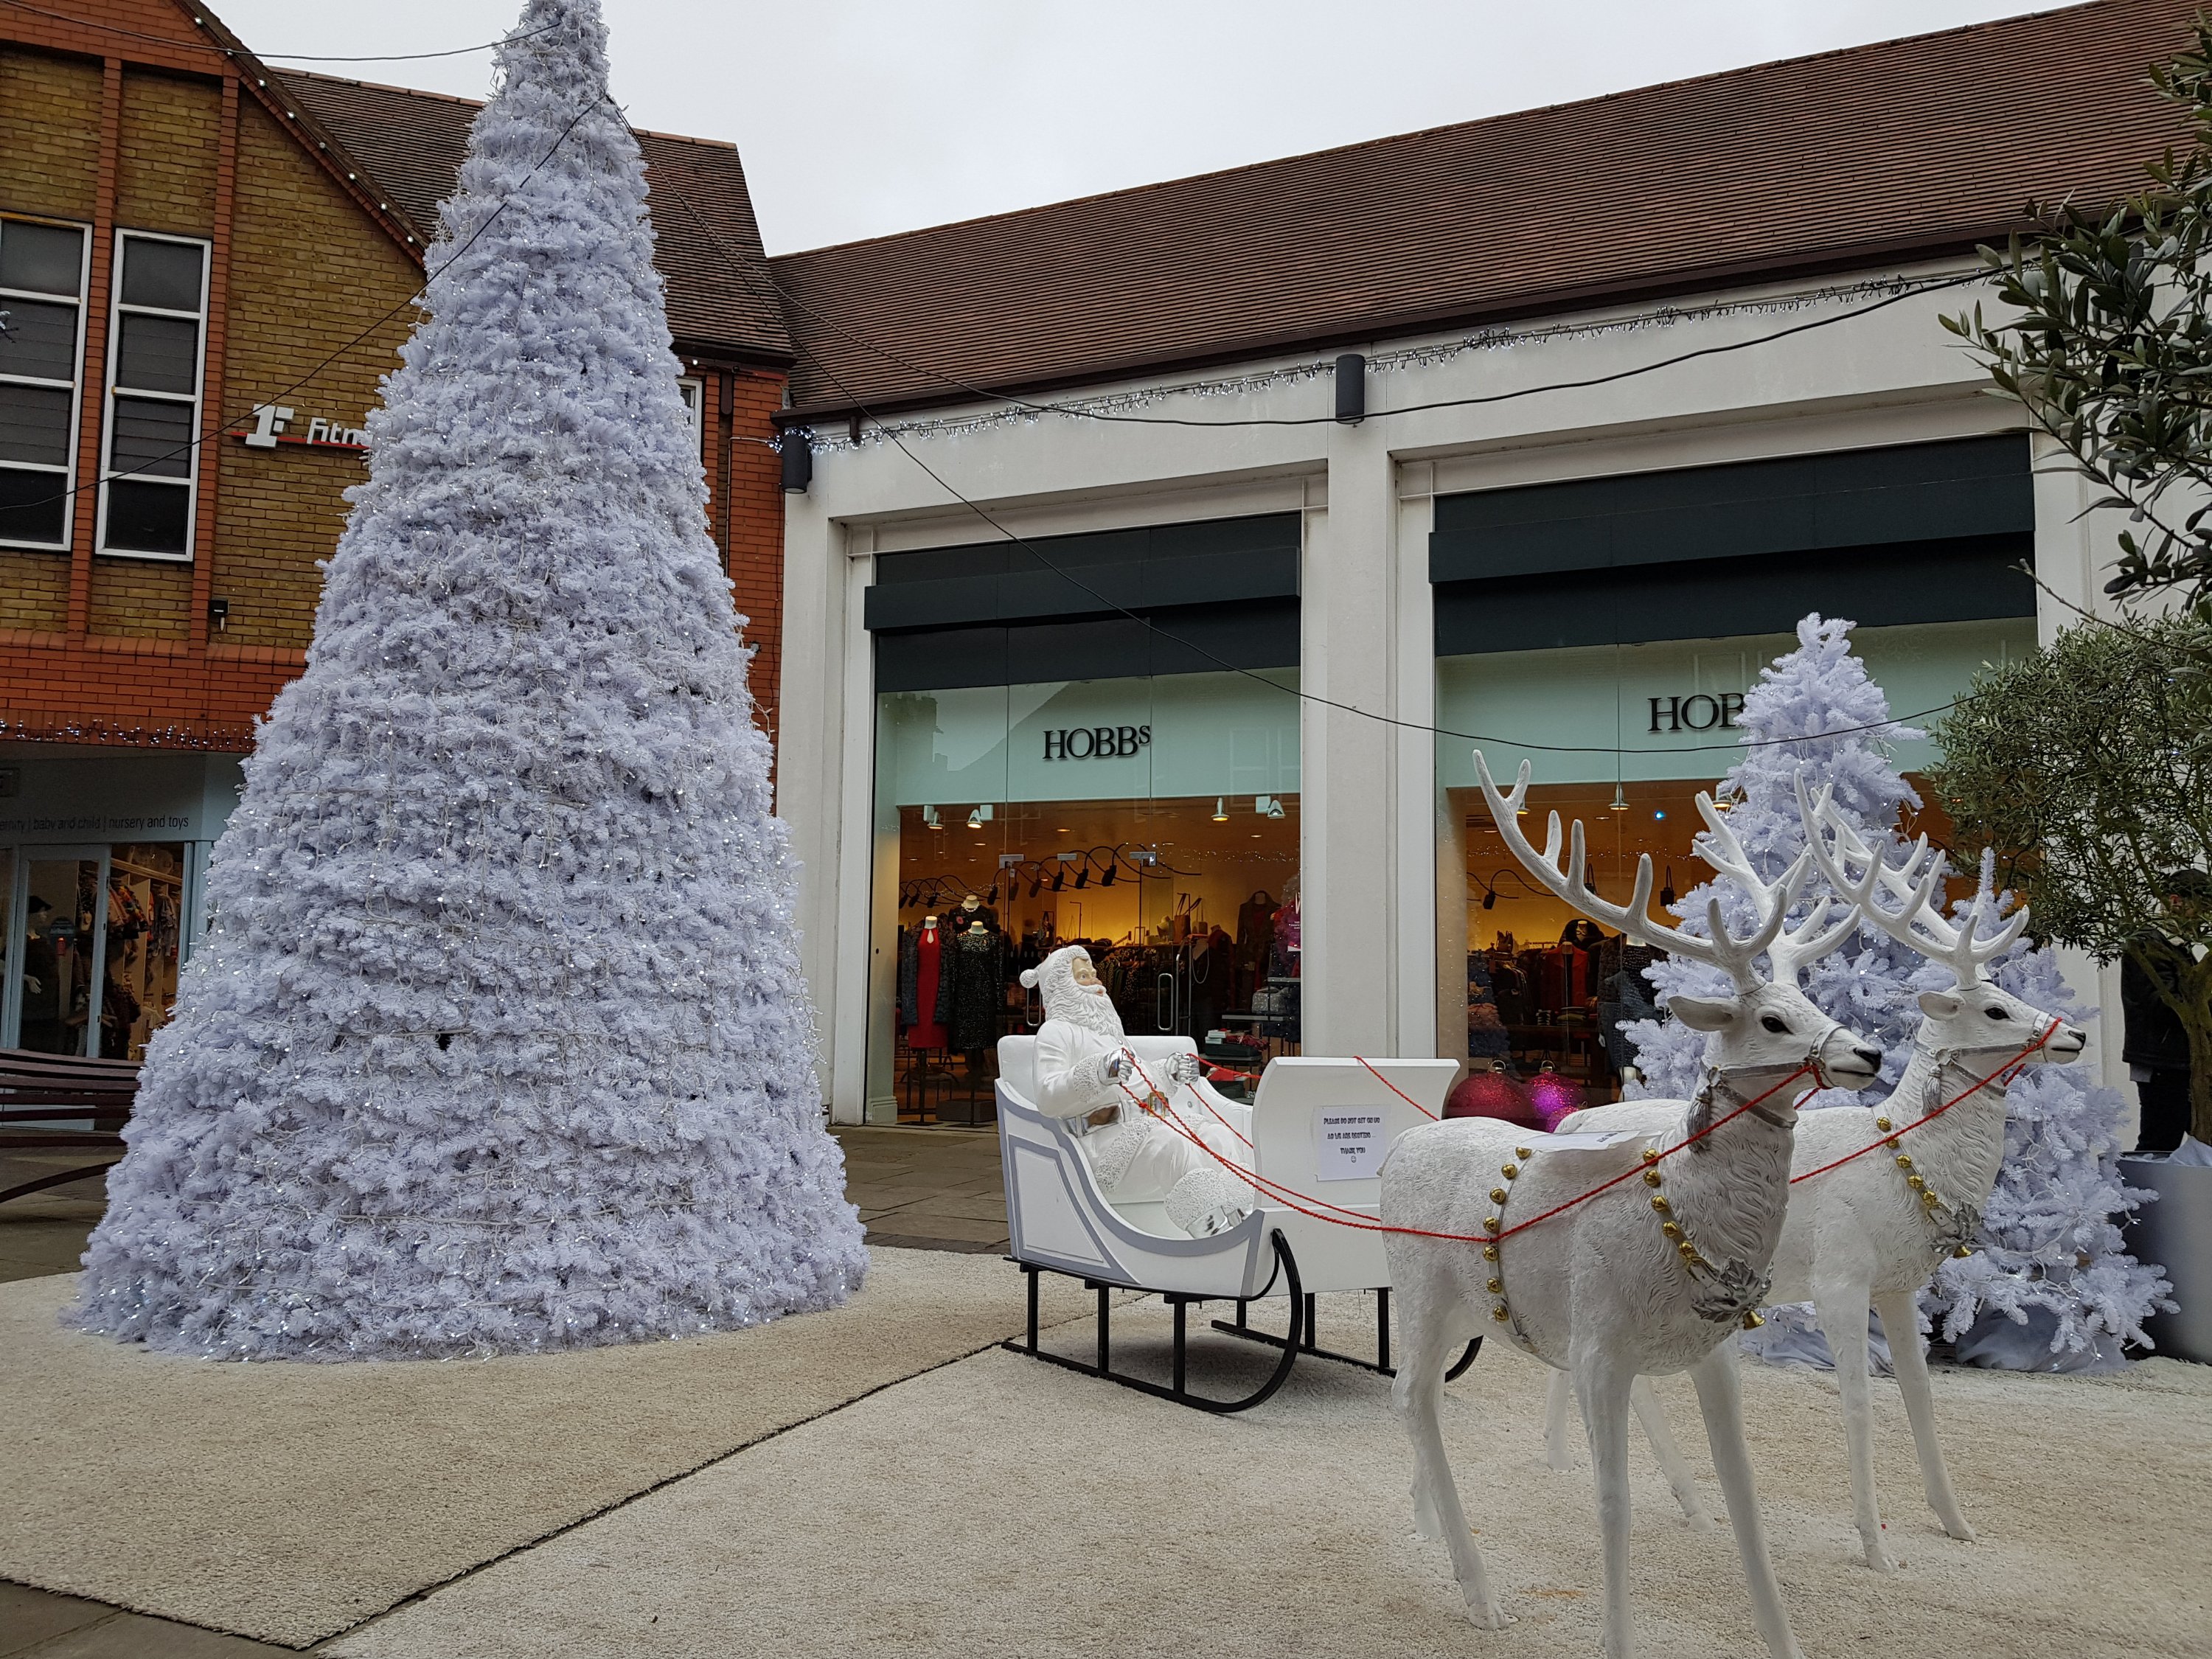 Santa in a sleigh with reindeer and christmas tree in Christopher Place festive display St Albans 